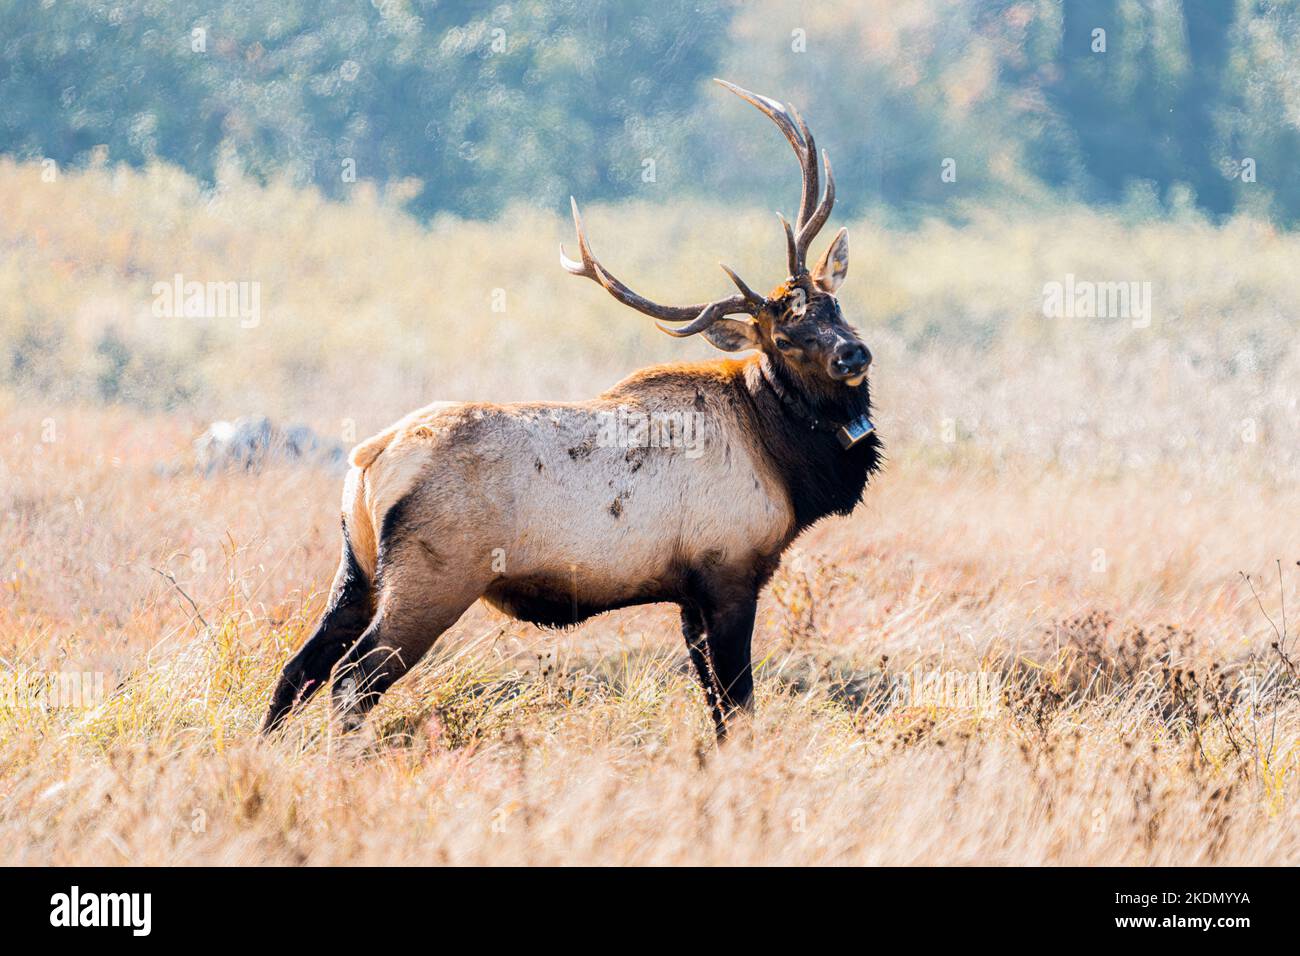 A photo of a large elk bull with impressive antlers standing in a grassy meadown in Autumn. Stock Photo